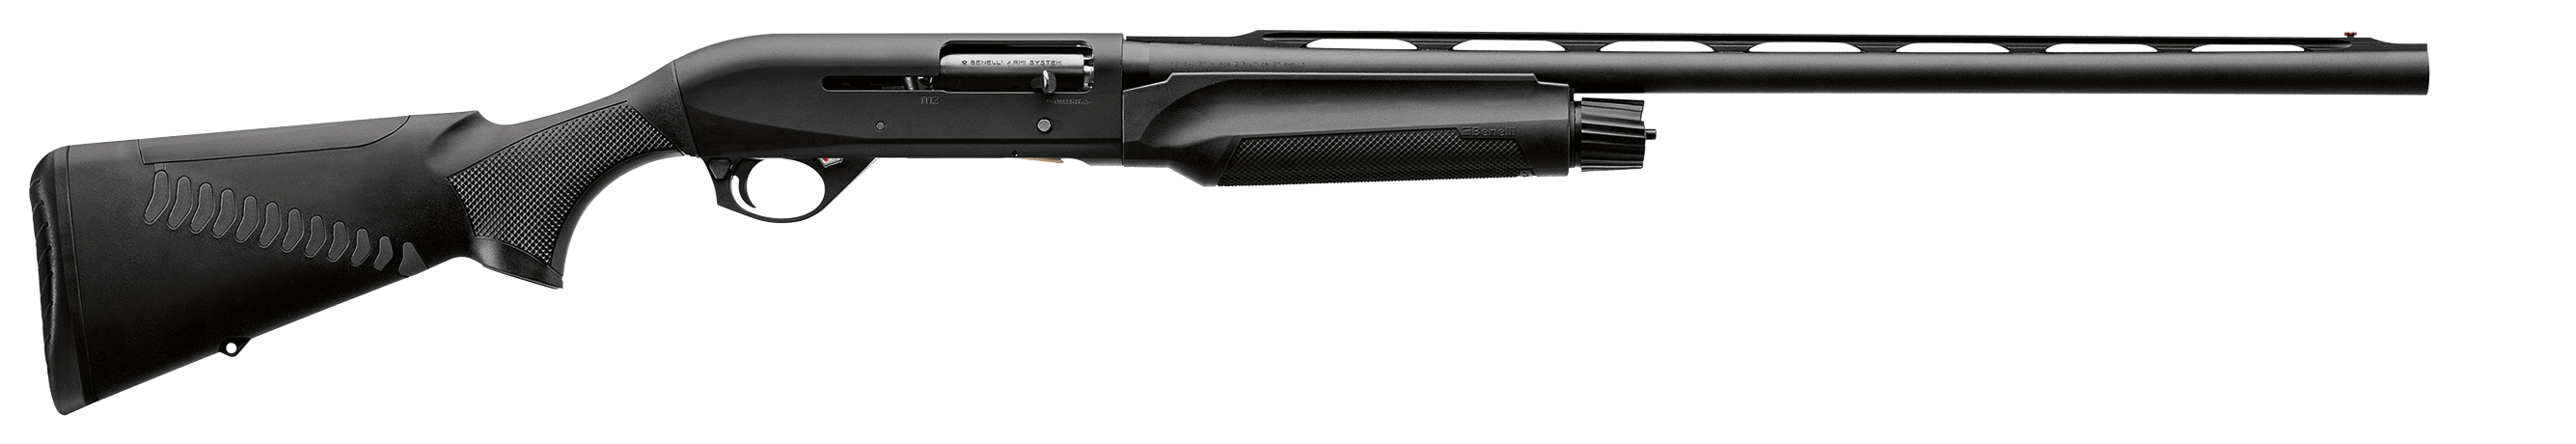 benelli-m2-comfortech-compact.png